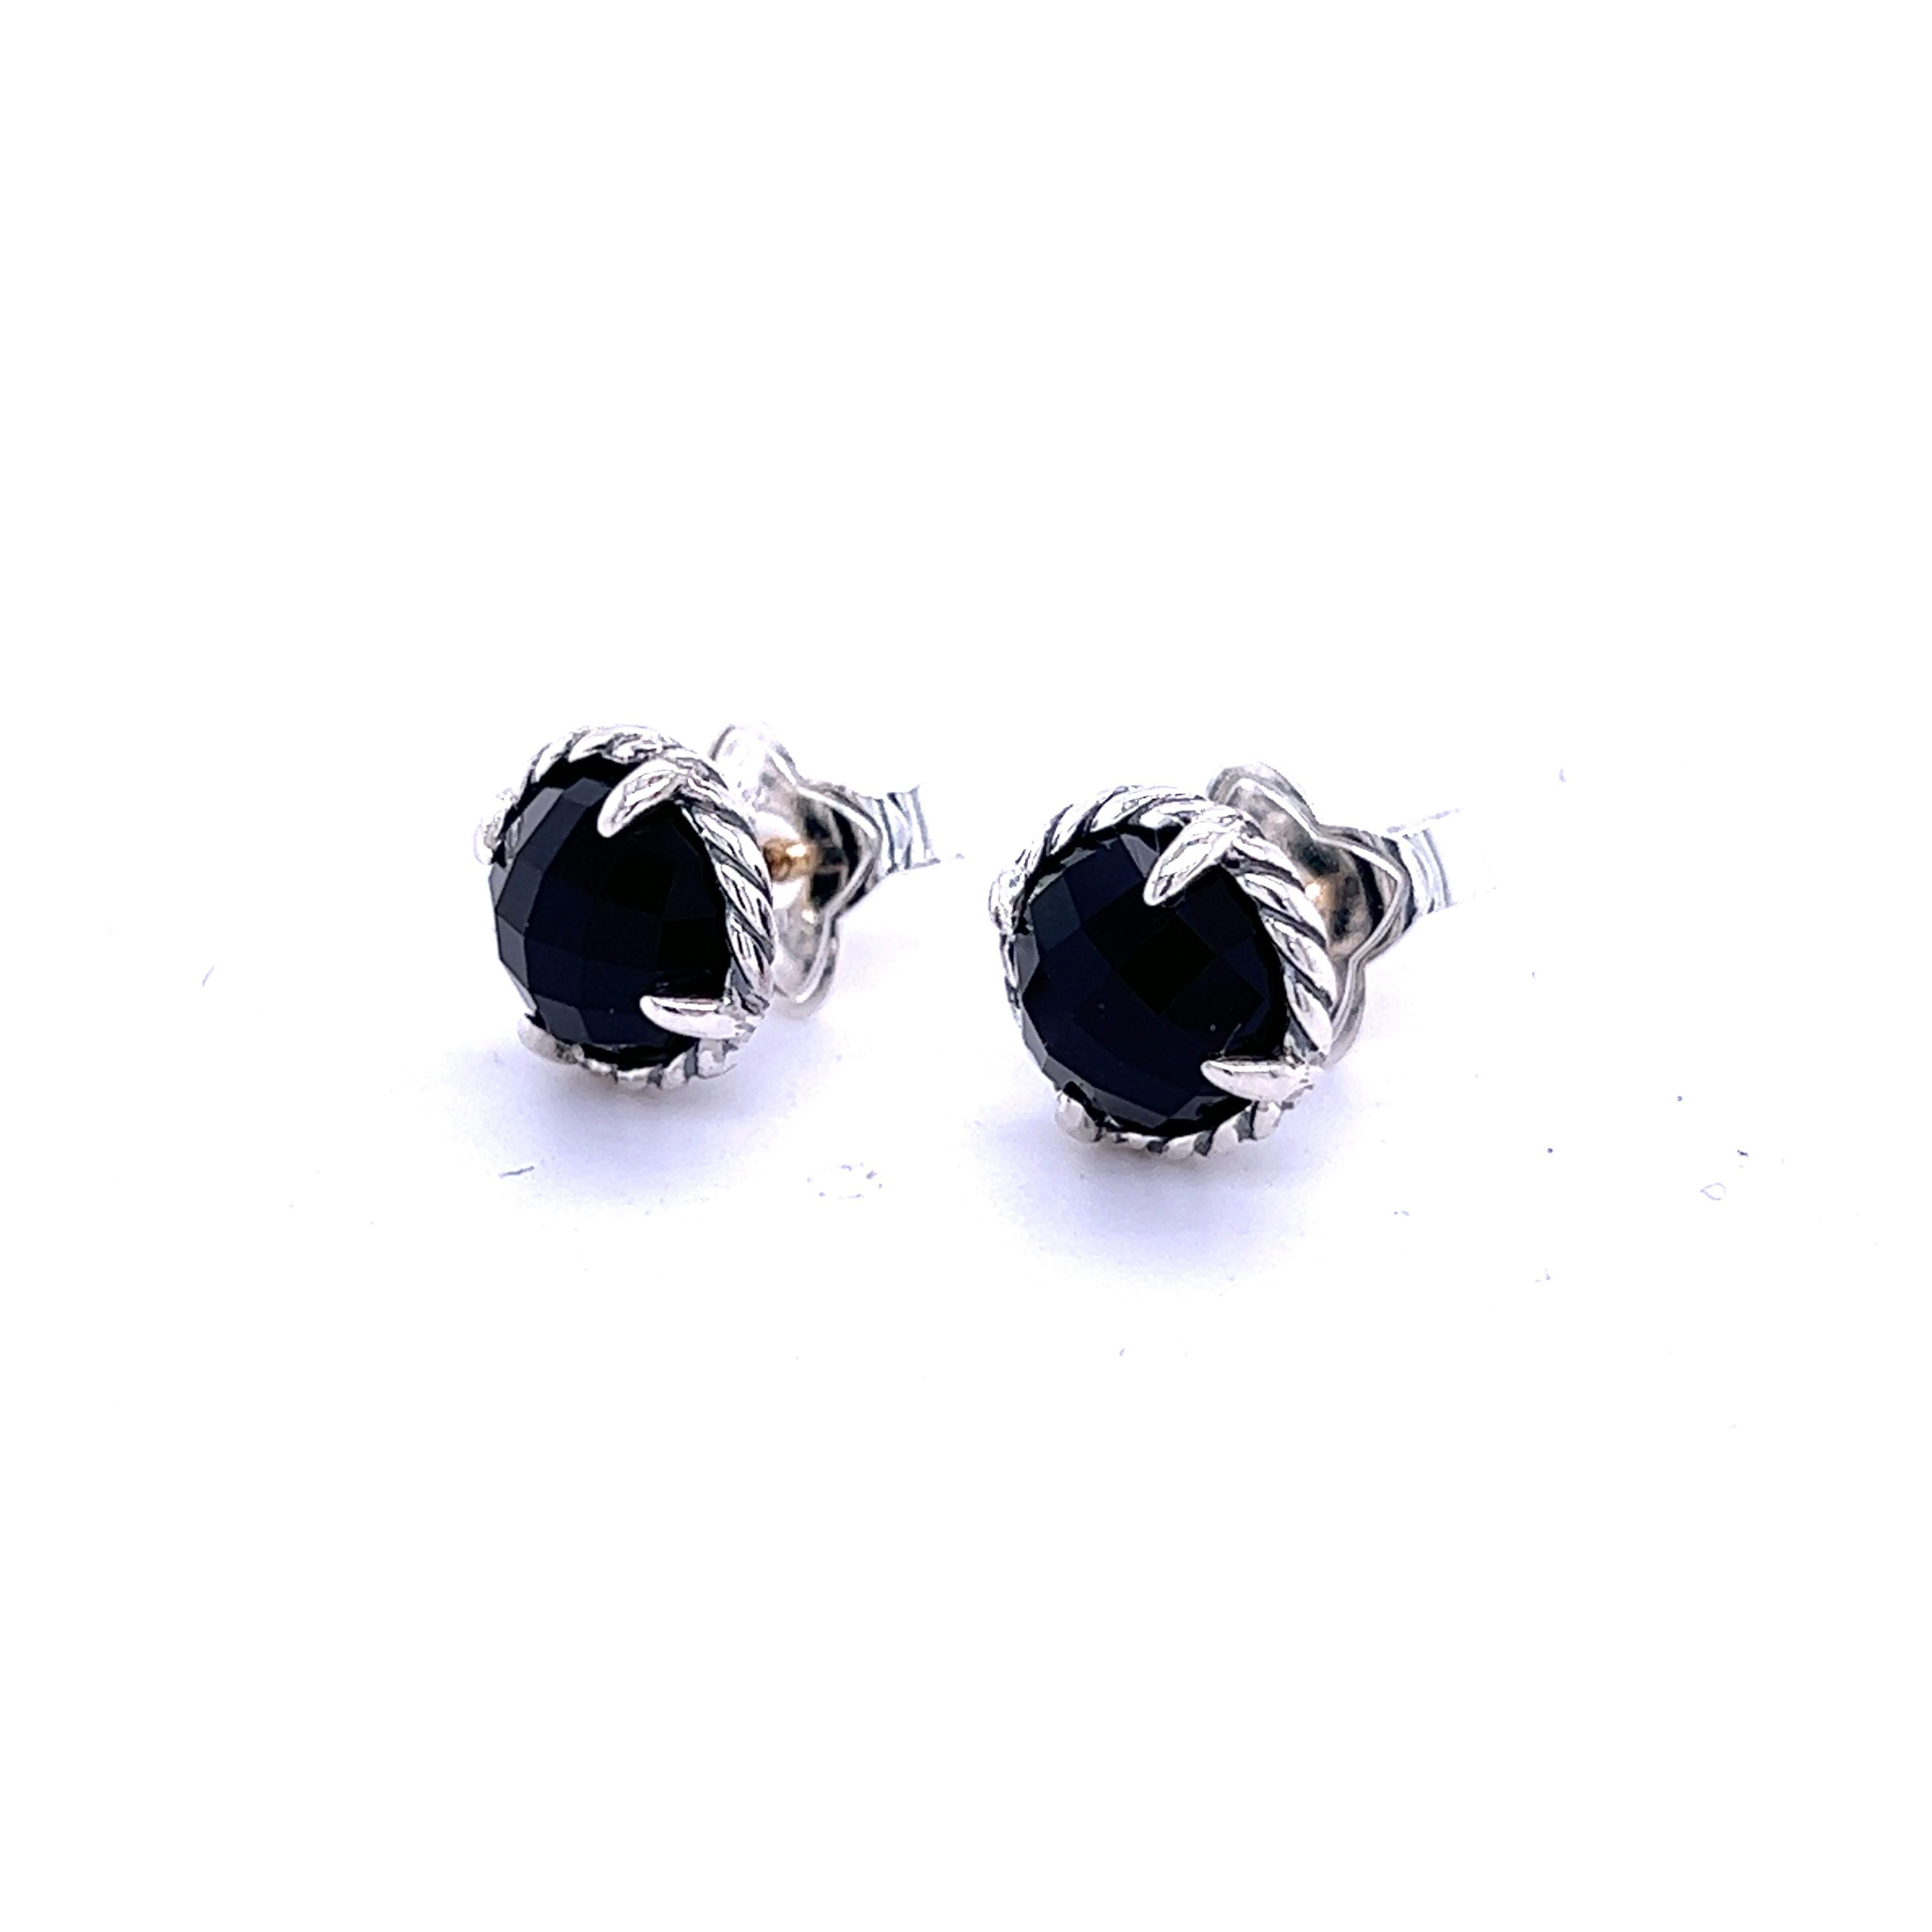 Authentic David Yurman Estate Black Onyx Chantelaine Stud Earrings Silver DY355

Retail: $999.00

TRUSTED SELLER SINCE 2002

PLEASE SEE OUR HUNDREDS OF POSITIVE FEEDBACKS FROM OUR CLIENTS!!

FREE SHIPPING

These elegant Authentic David Yurman